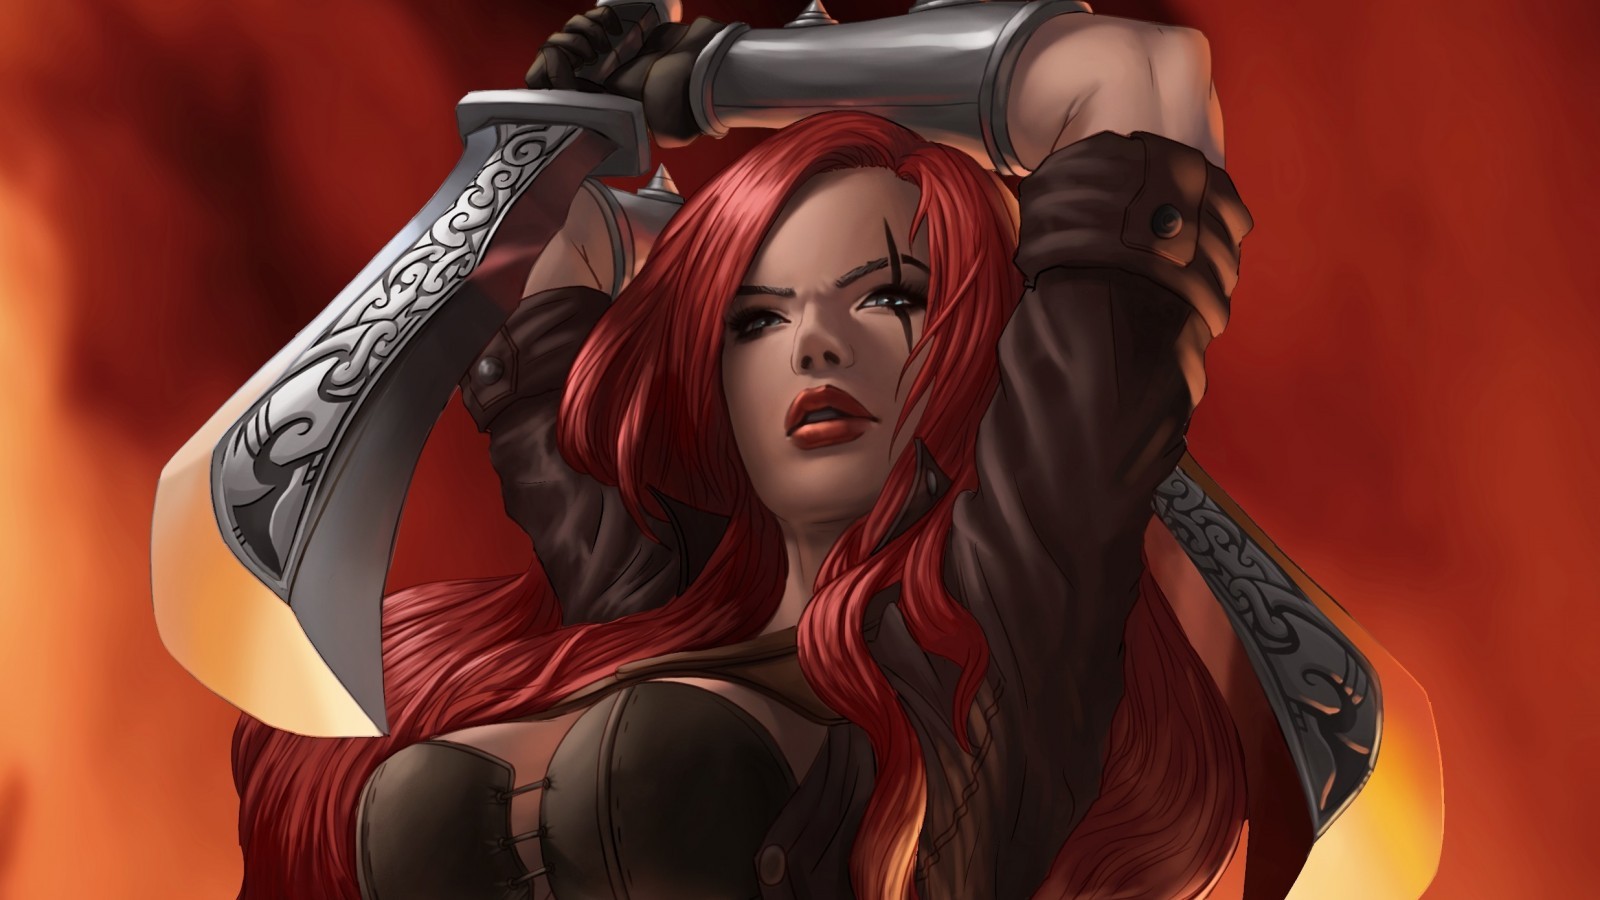 General 1600x900 League of Legends Katarina (League of Legends) fantasy girl redhead PC gaming weapon women with swords sword red lipstick lipstick long hair fantasy art video game art video game girls